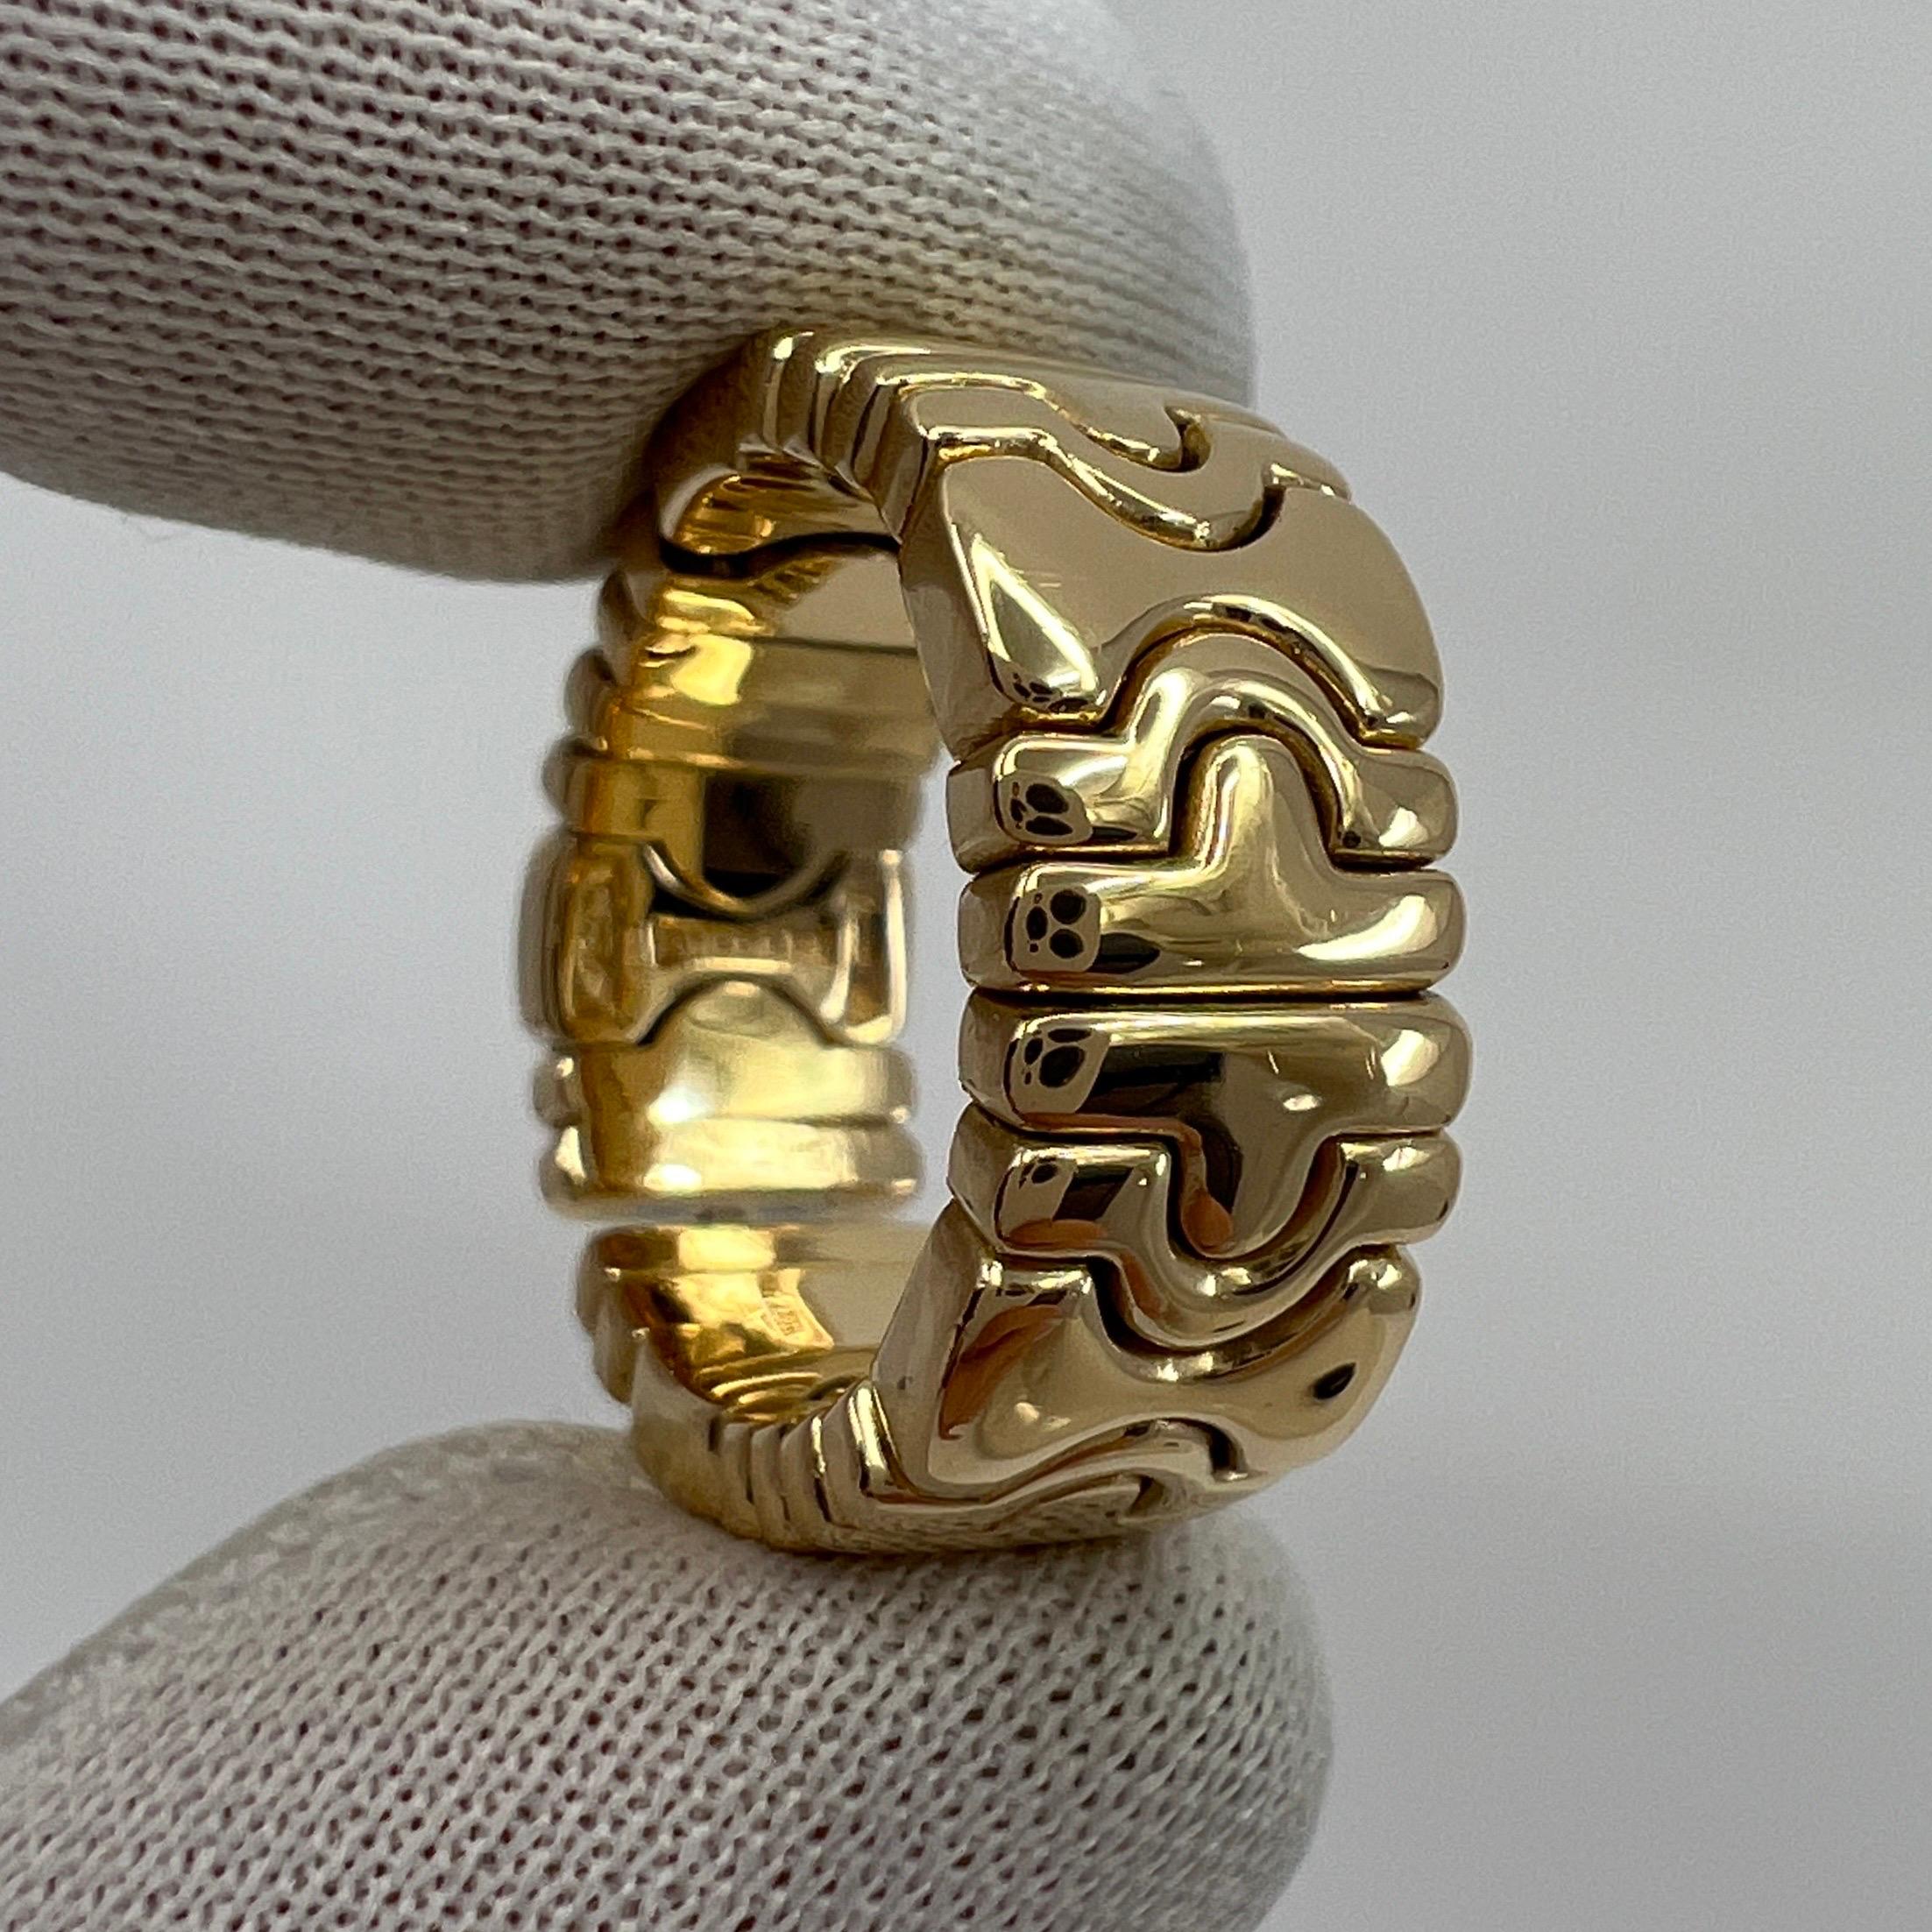 Vintage Bvlgari Parentesi 18 Karat Yellow Gold Spring Ring.

A beautiful vintage 18k yellow gold Bvlgari Parentesi ring with flexible spring design.
This stylish and unique spring design allowing it to fit between L1/2-N UK ring sizes approx